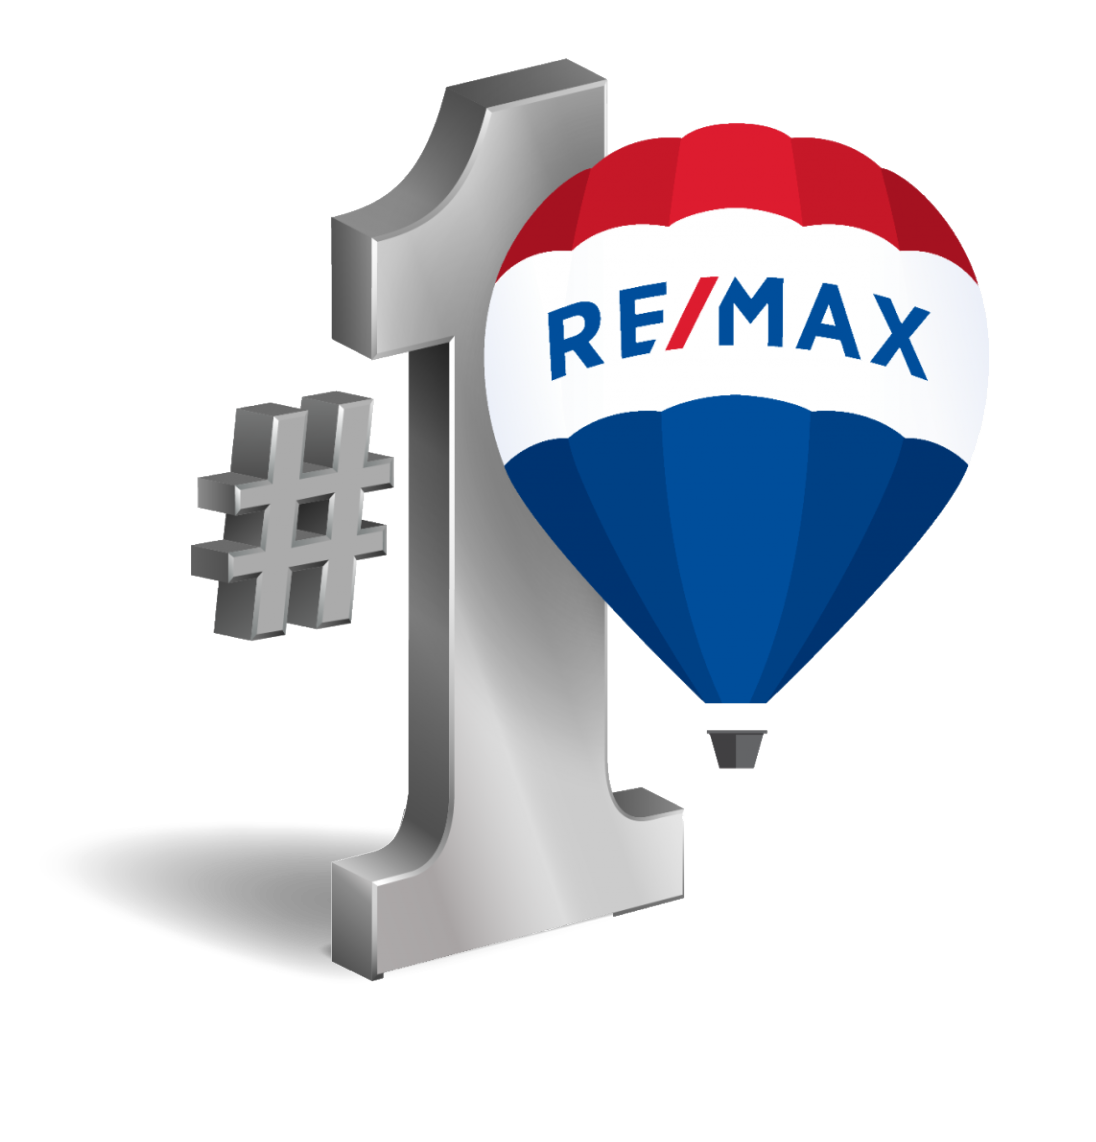 Remax Balloon in front of #1